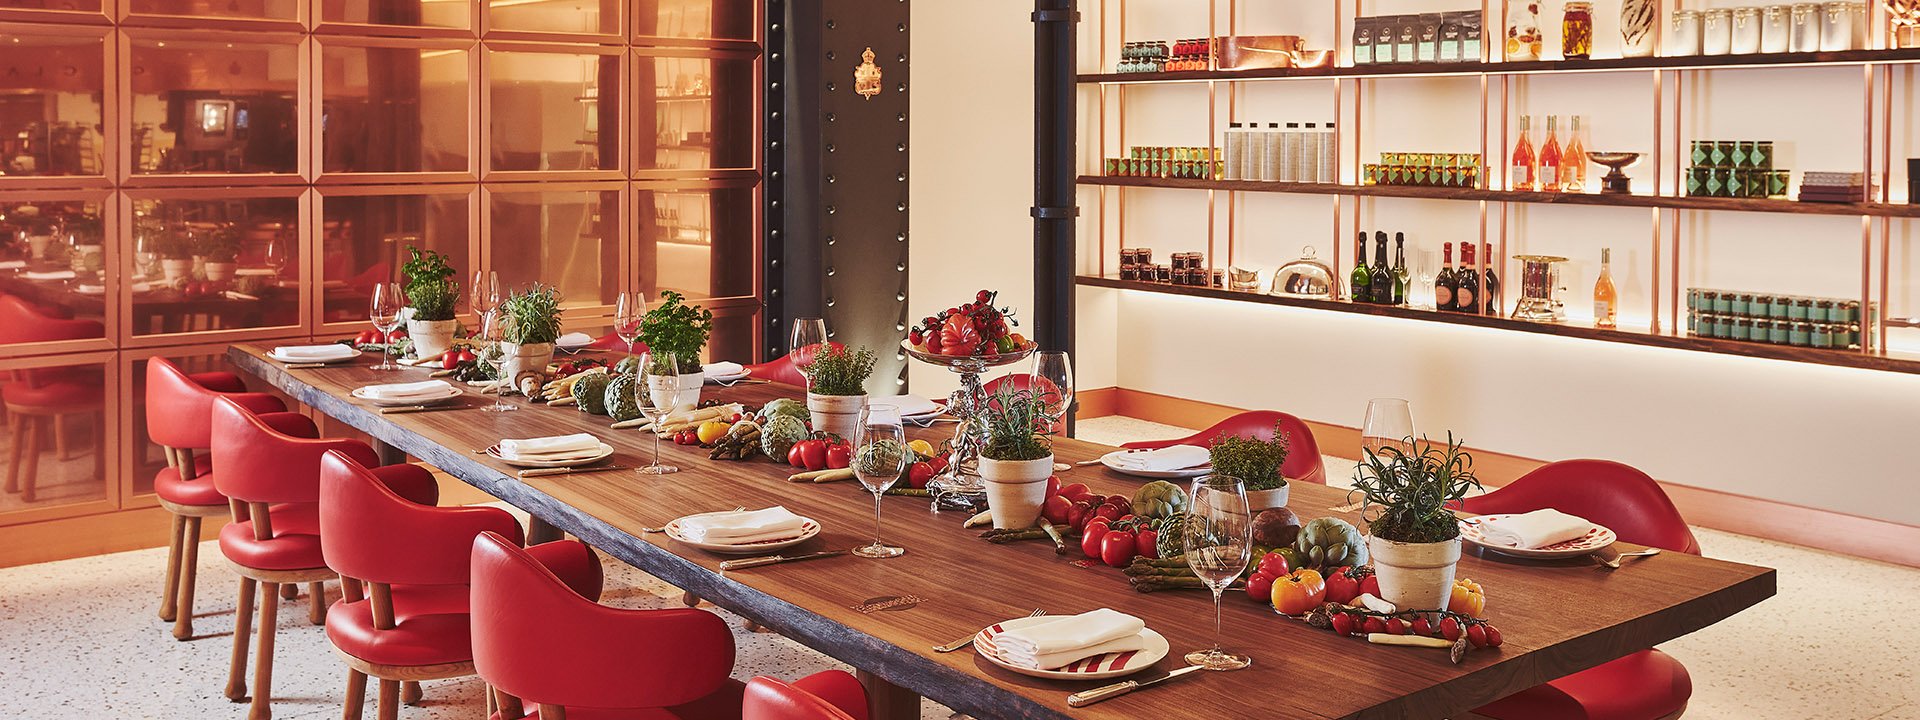 A decorated table with vegetables and plates, red chairs, and a space designed for a masterclass at L'Epicerie.